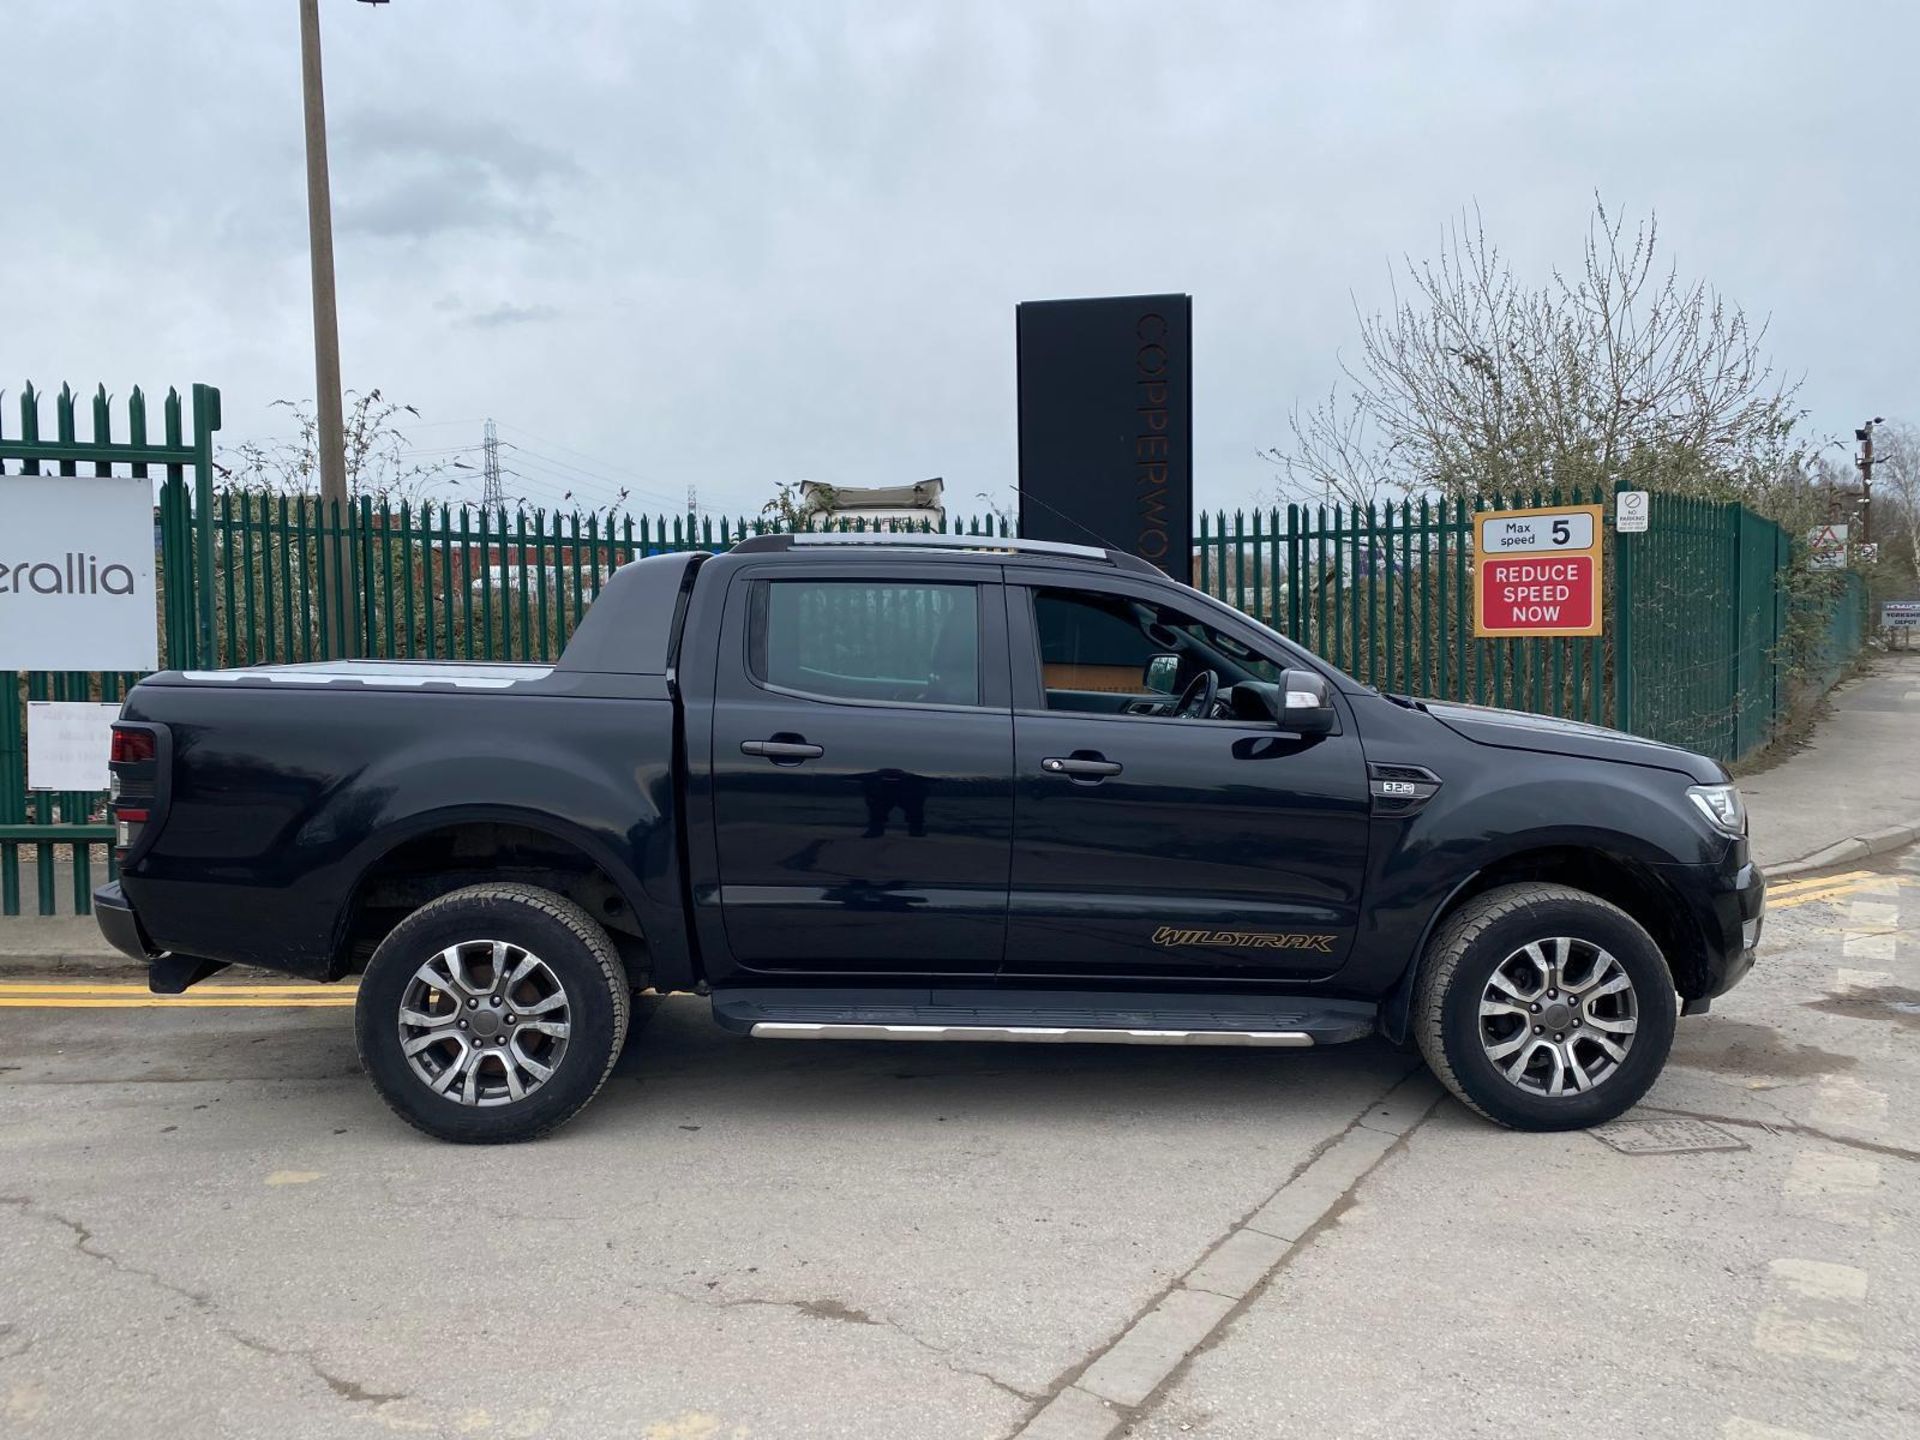 2016 66 FORD RANGER 3.2 TDCI WILDTRAK AUTO DOUBLE CAB 4X4 >>--NO VAT ON HAMMER--<< - Image 2 of 13